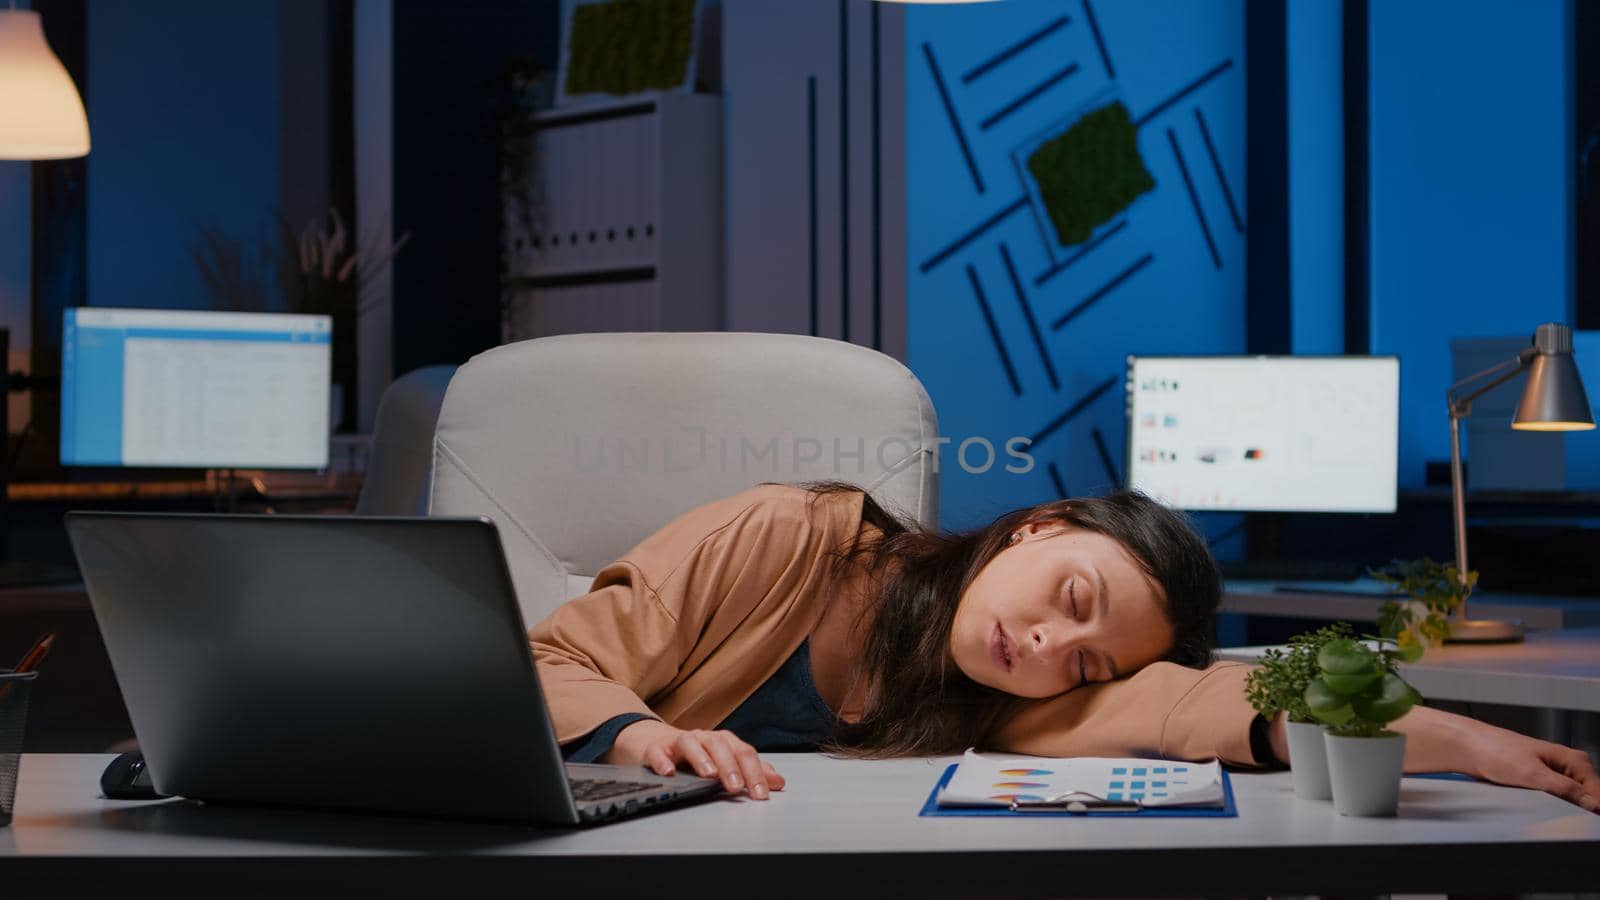 Businesswoman sleeping on desk while working at accounting statistics in business company office late at night. Overworked, stressed exhausted employee at workplace napping on overtime